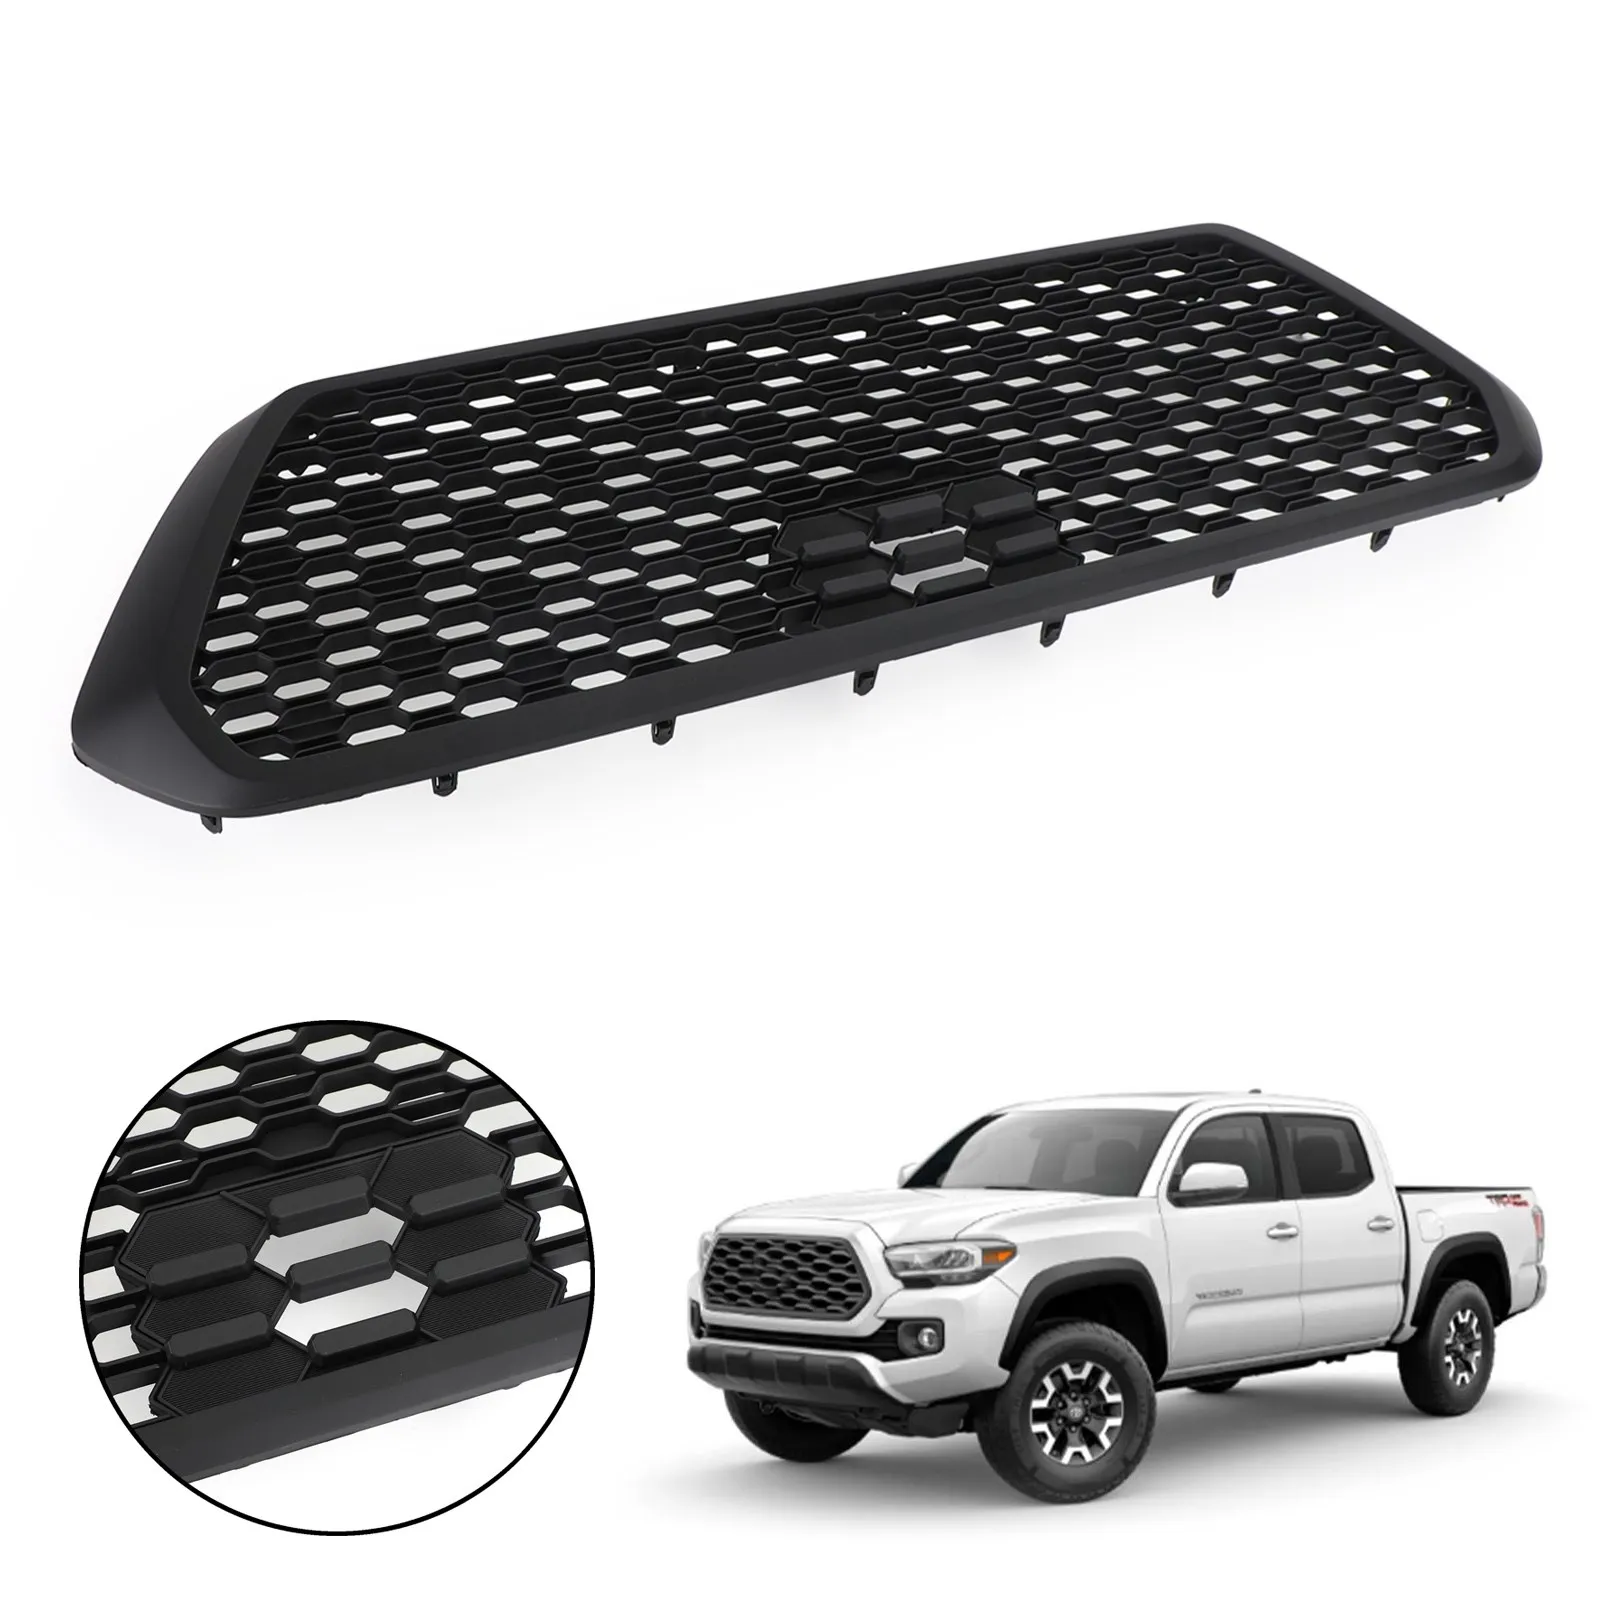 

Matte Black Front Bumper Hood Grill Grille For Toyota Tacoma 2016 2017 2018 2019 2021 2021 TRD PRO With Letter